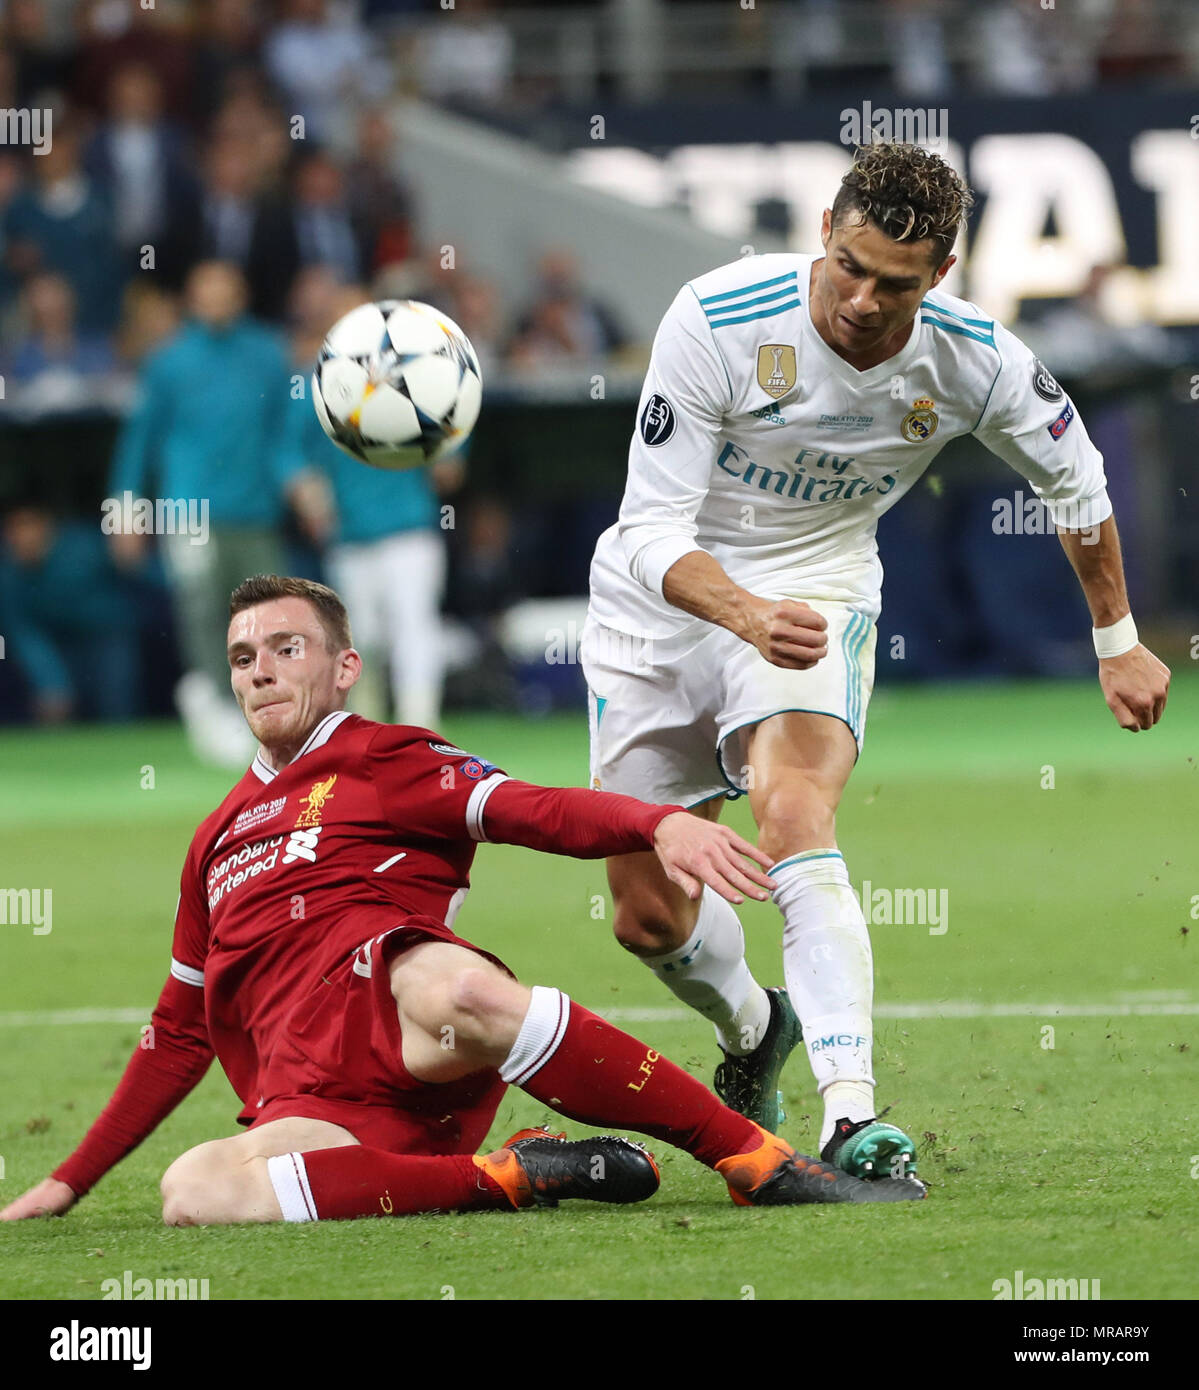 Kiev, Ukraine. 22nd Mar, 2018. Real Madrid's CRISTIANO RONALDO (R) fight for the ball with Liverpool's ANDY ROBERTSON (L), during the UEFA Champions League final soccer match Real Madrid vs Liverpool FC, at the NSC Olimpiyskiy stadium in Kiev on 26 May 2018. Credit: Serg Glovny/ZUMA Wire/Alamy Live News Stock Photo